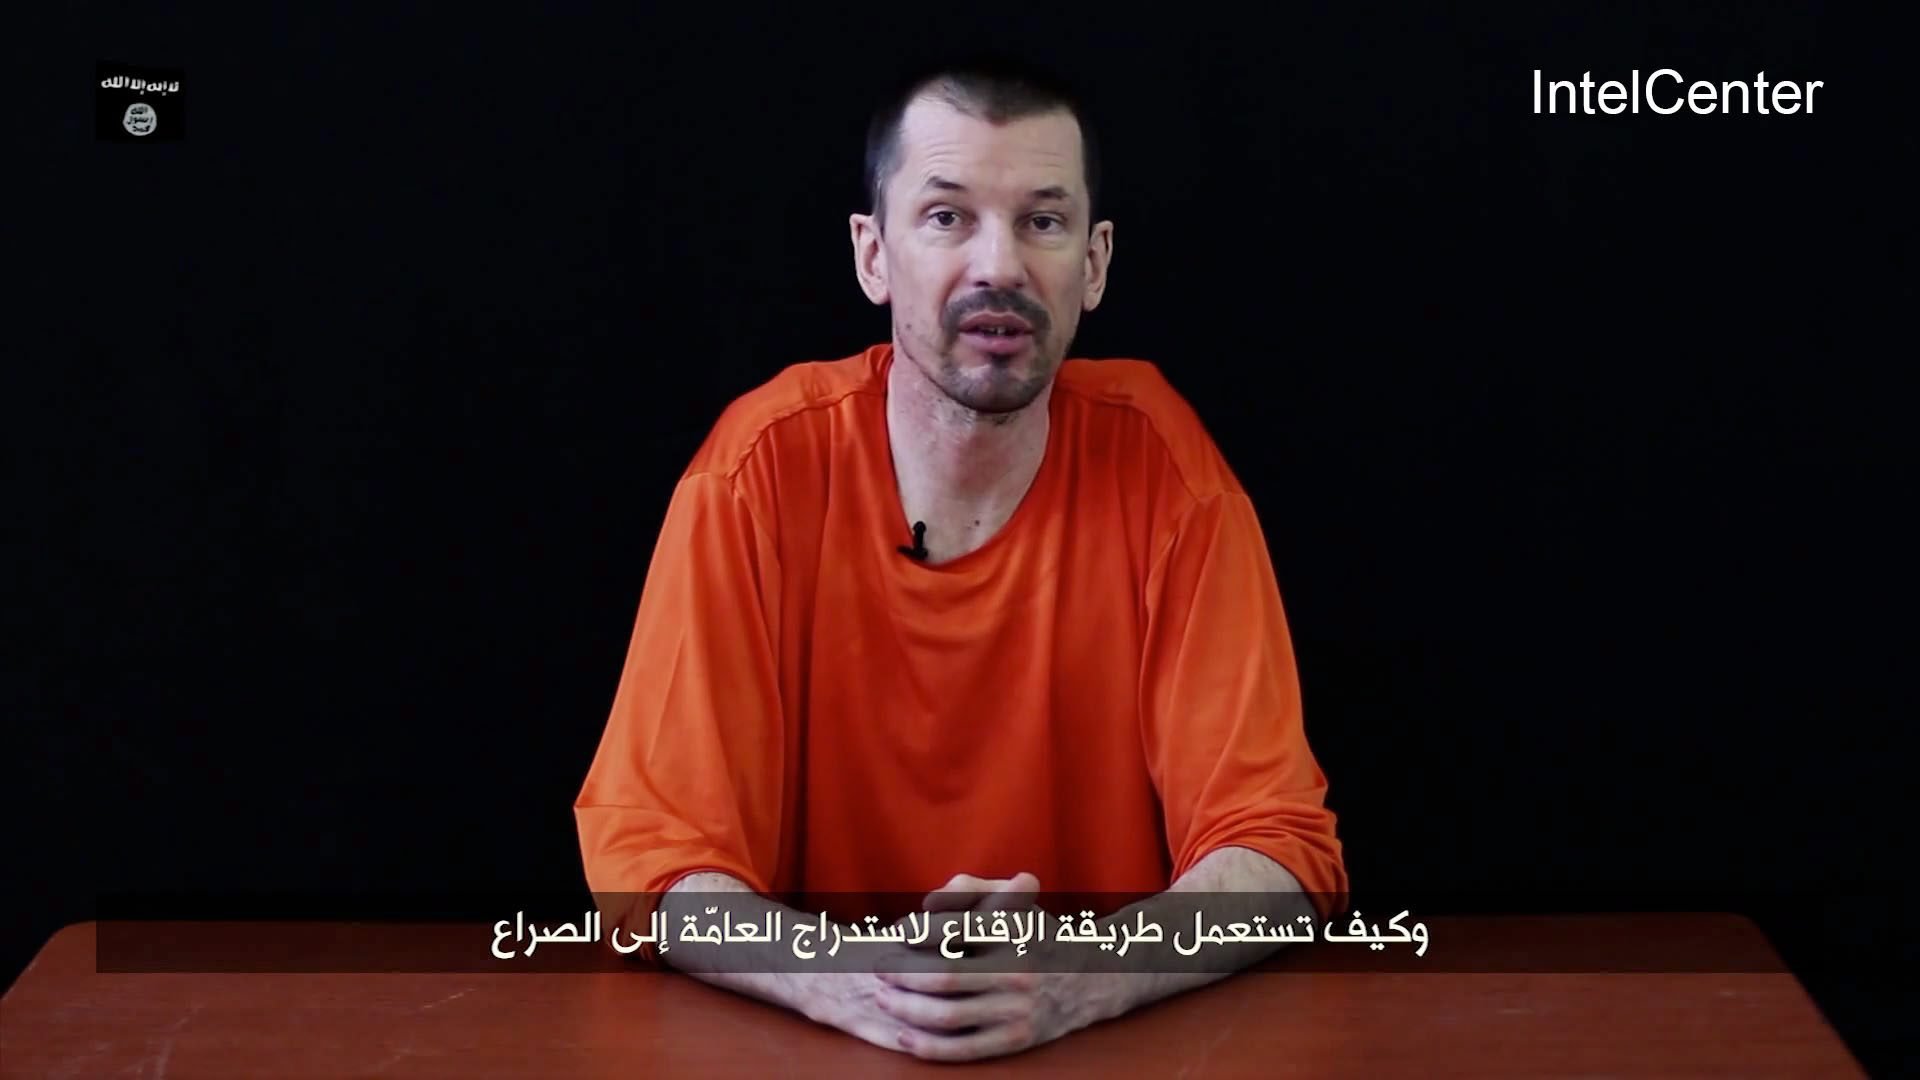 Screenshot shows British hostage John Cantlie held by Islamic State militants at an undisclosed location on Sept. 23, 2014.